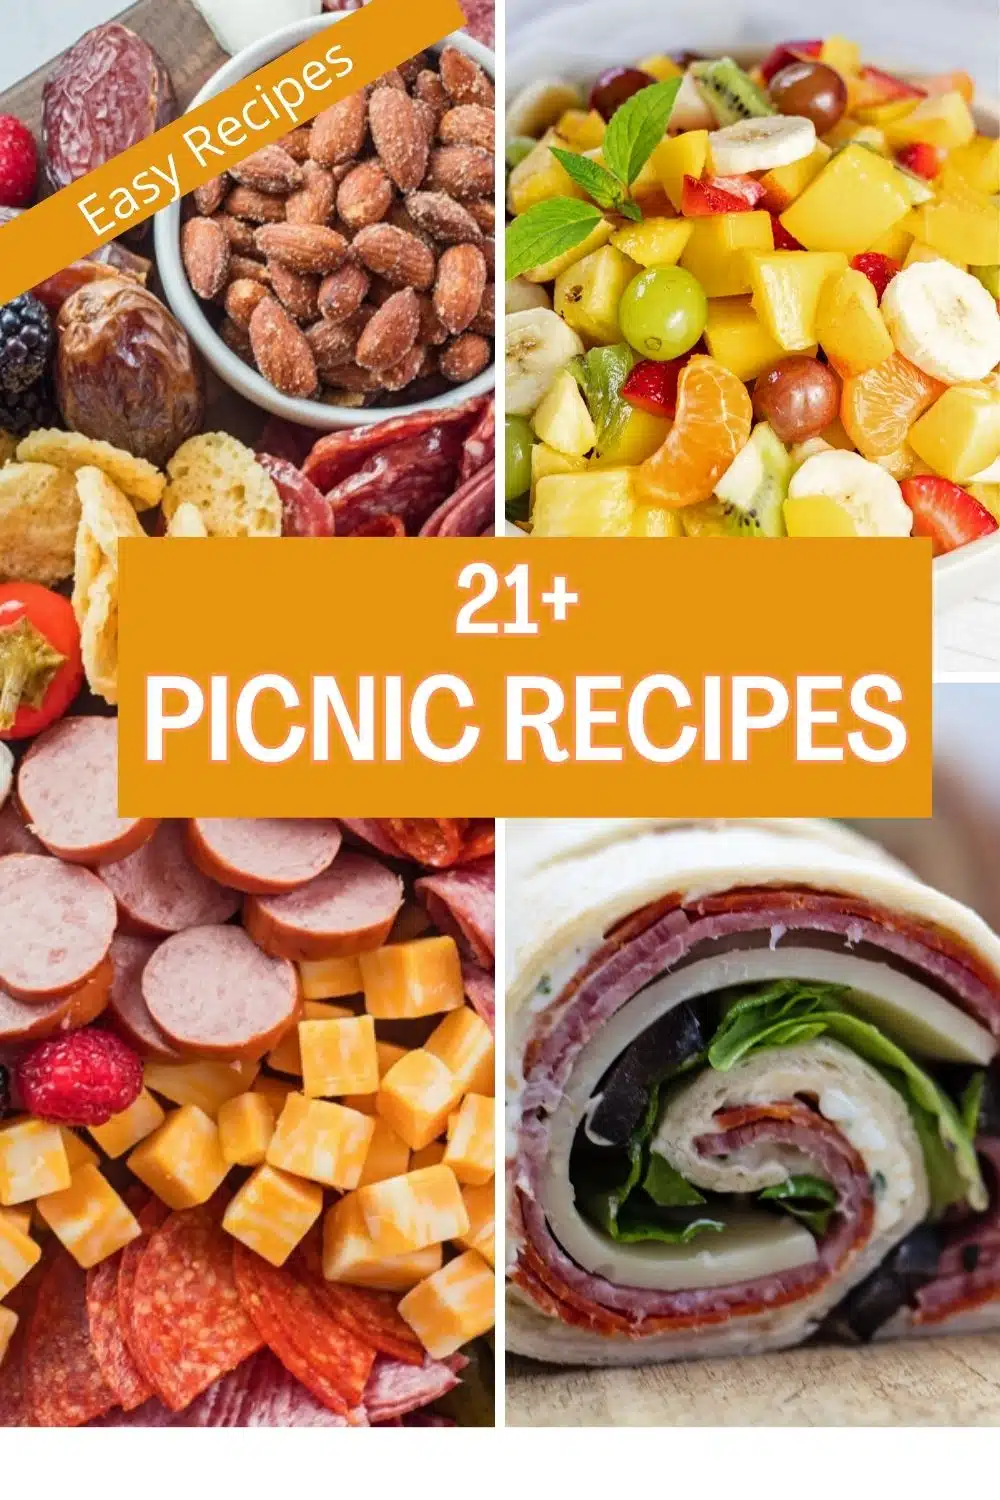 Pin split image with text showing different picnic recipe ideas.